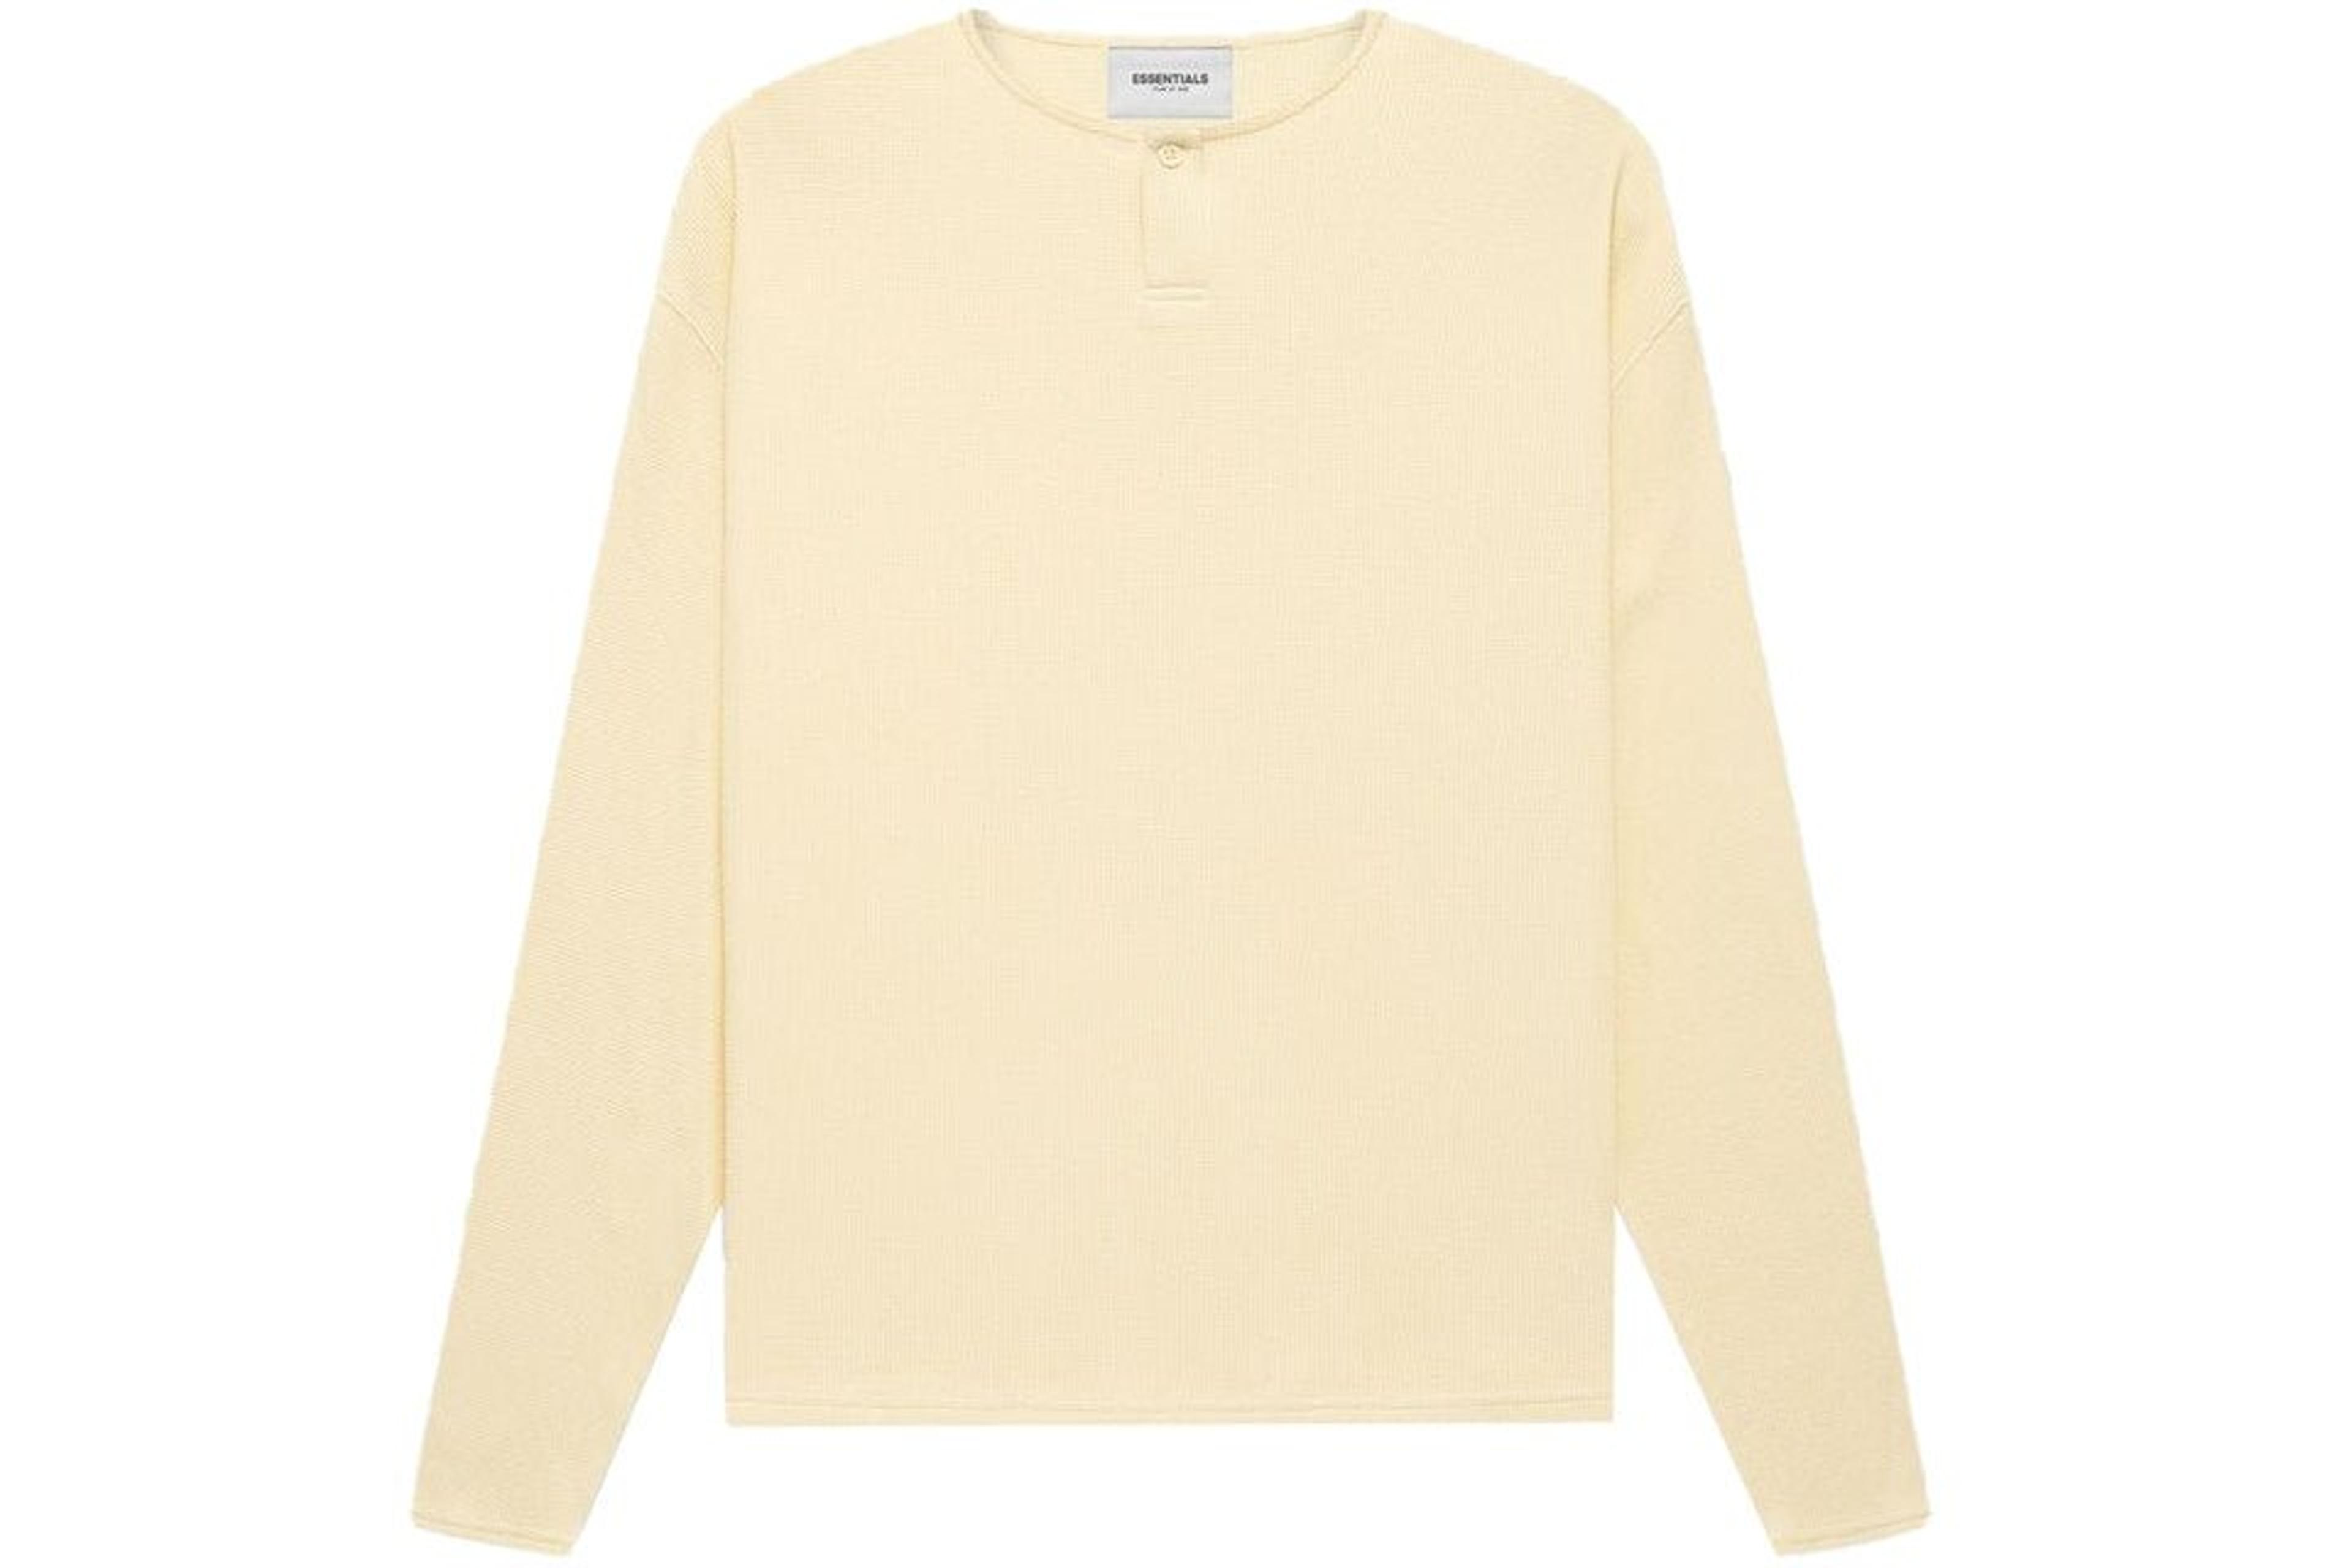 Fear of god Essentials Thermal Henley Long Sleeve Tee Cream